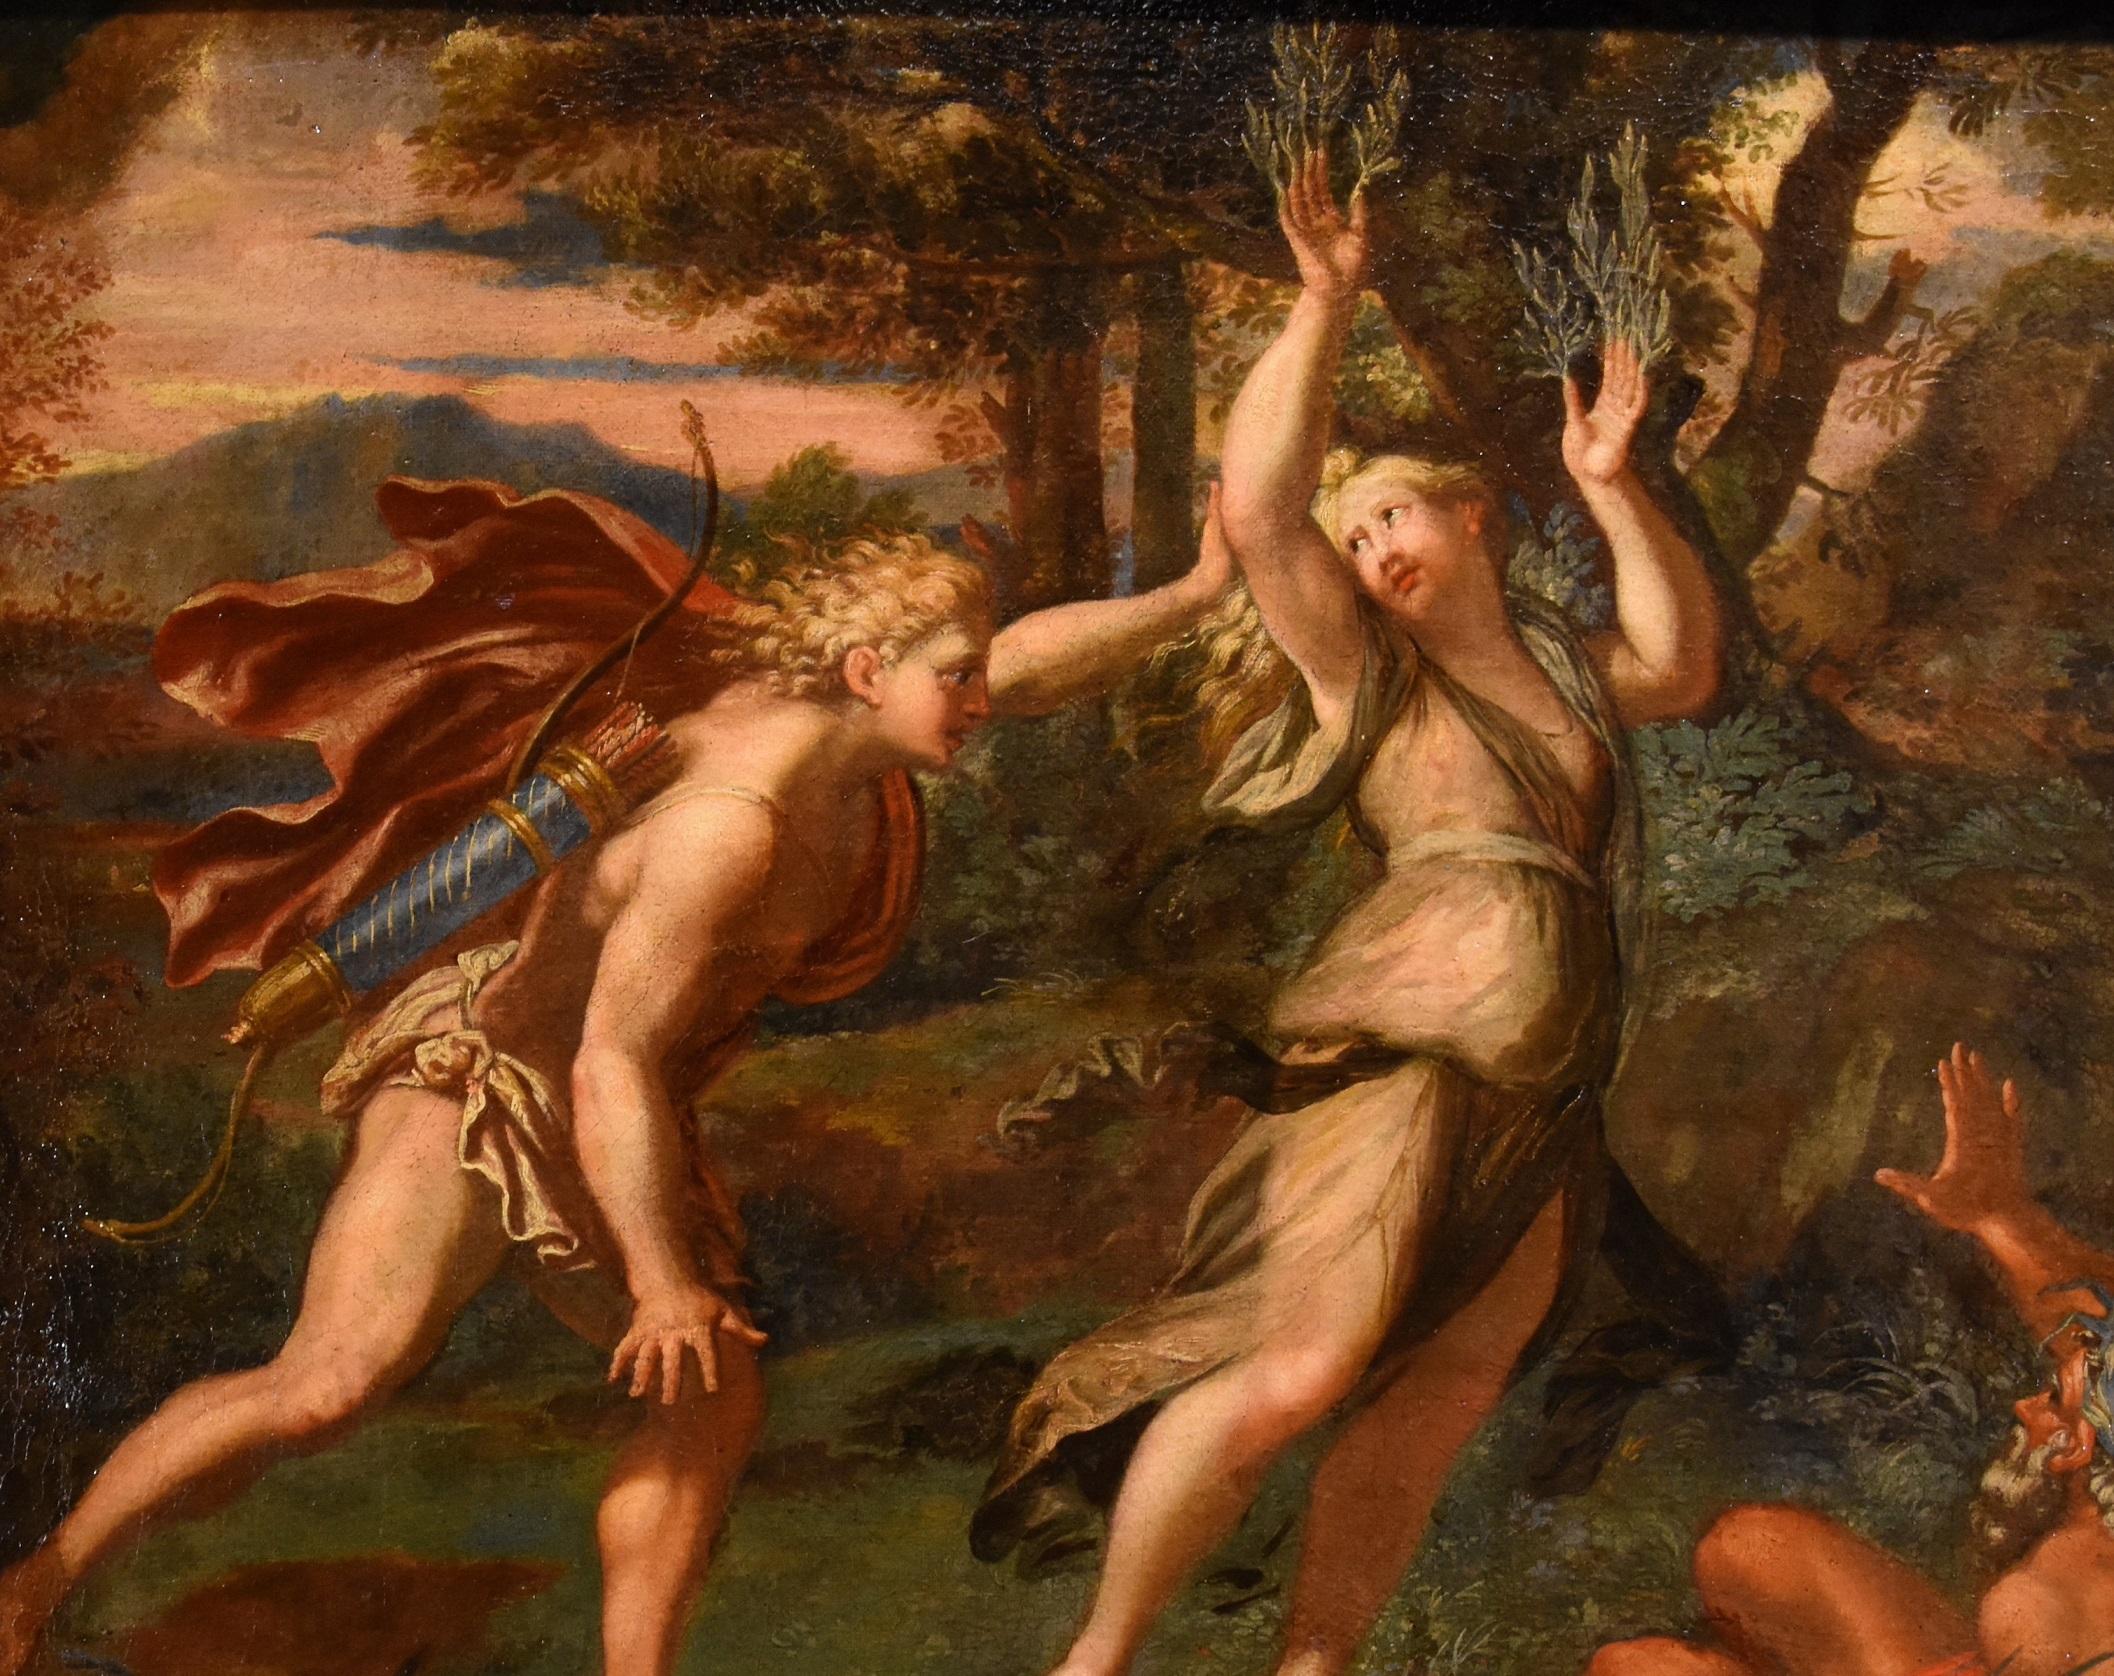 Giovanni Angelo Canini (Rome, 1608 - Rome, 1666)
The Myth of Apollo and Daphne

Oil on canvas (84 x 100 cm - Framed 106 x 125 cm.)
The work is accompanied by expertise by Prof. Giancarlo Sestieri (Rome)

'' I thank you for having brought this